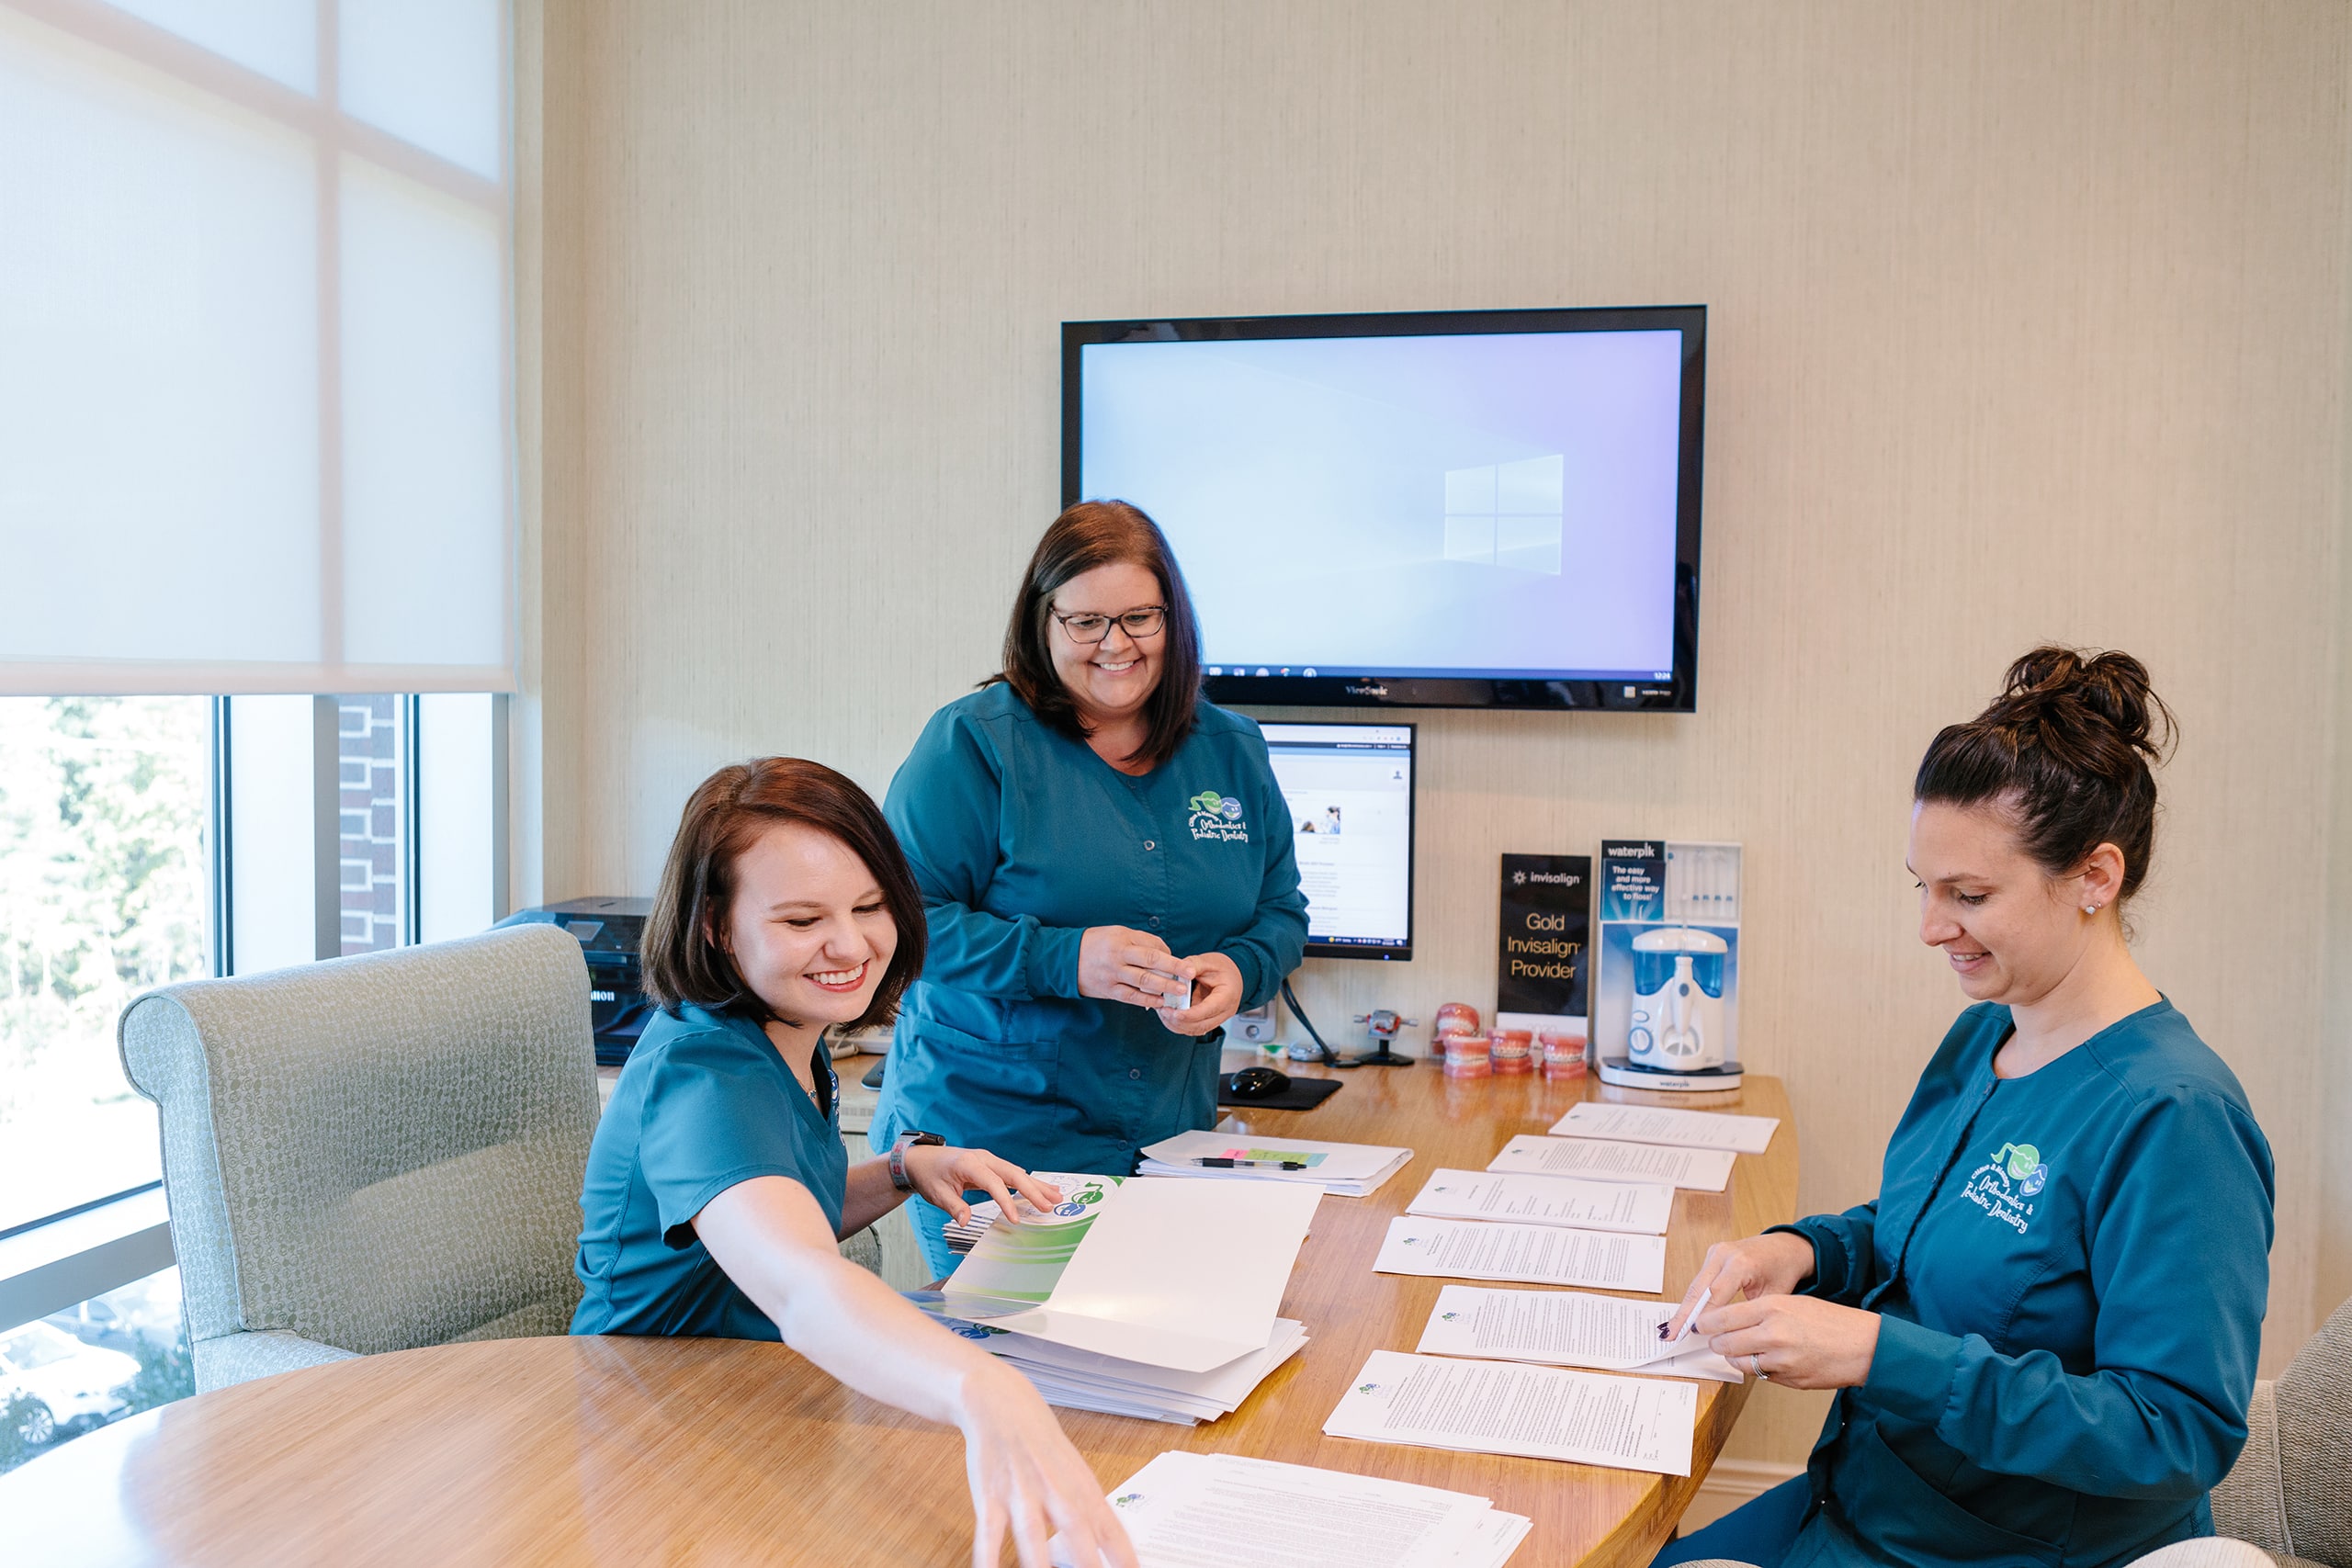 Two orthodontist assistant filing paperwork at a desk.